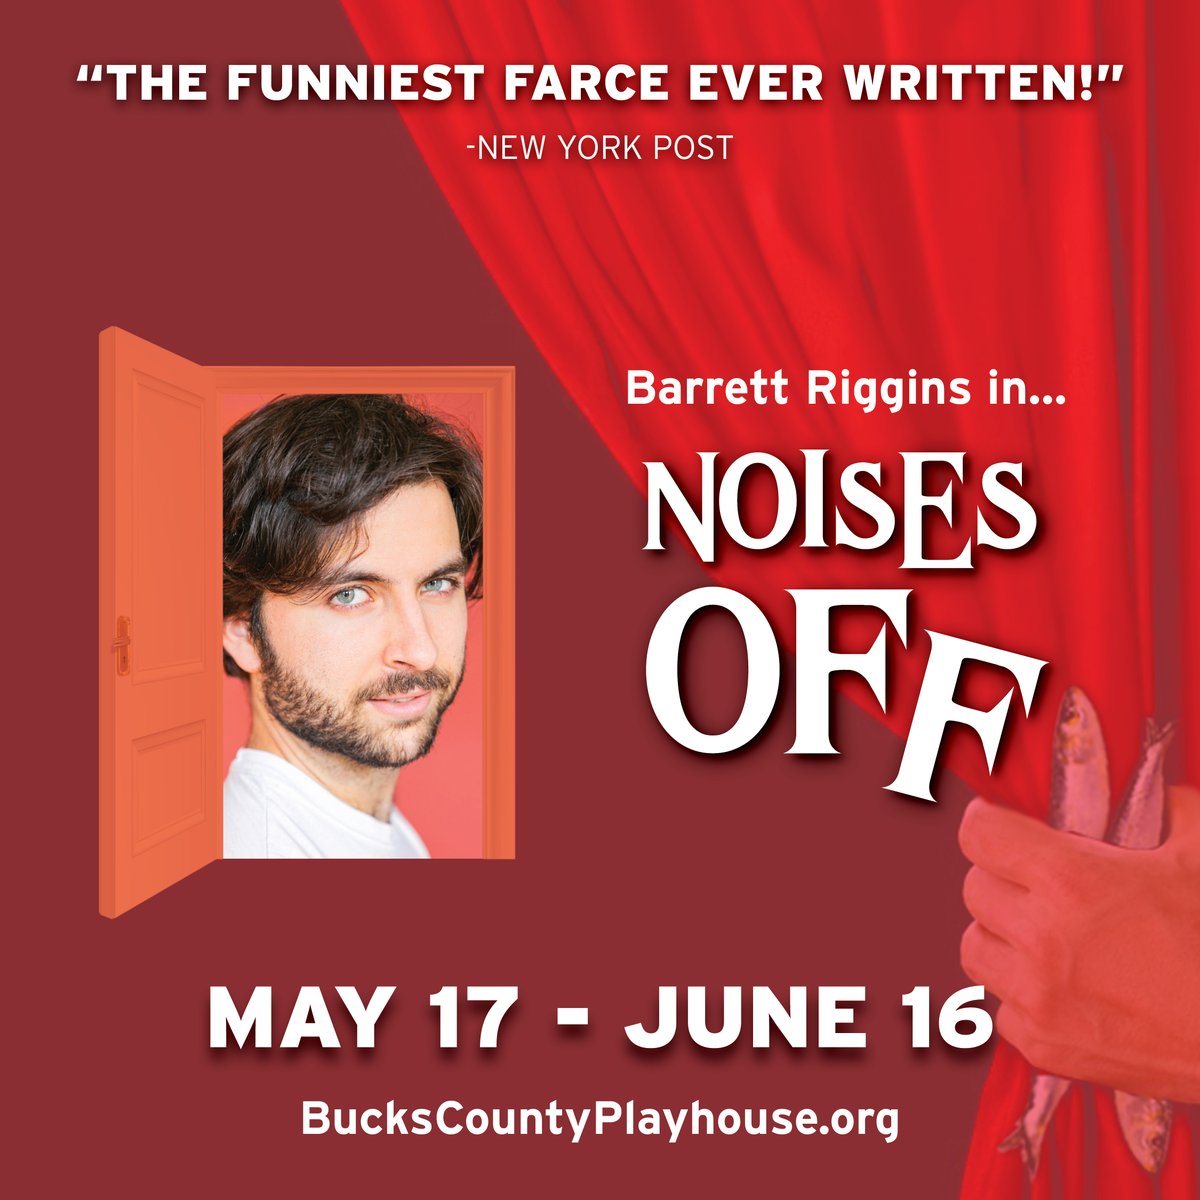 NOISES OFF By Michael Frayn Directed by Hunter Foster MAY 17 - JUNE 16 A director and a troupe of mediocre actors blunder from a bad dress rehearsal to a spectacularly disastrous performance. Get your tickets TODAY! BucksCountyPlayhouse.org